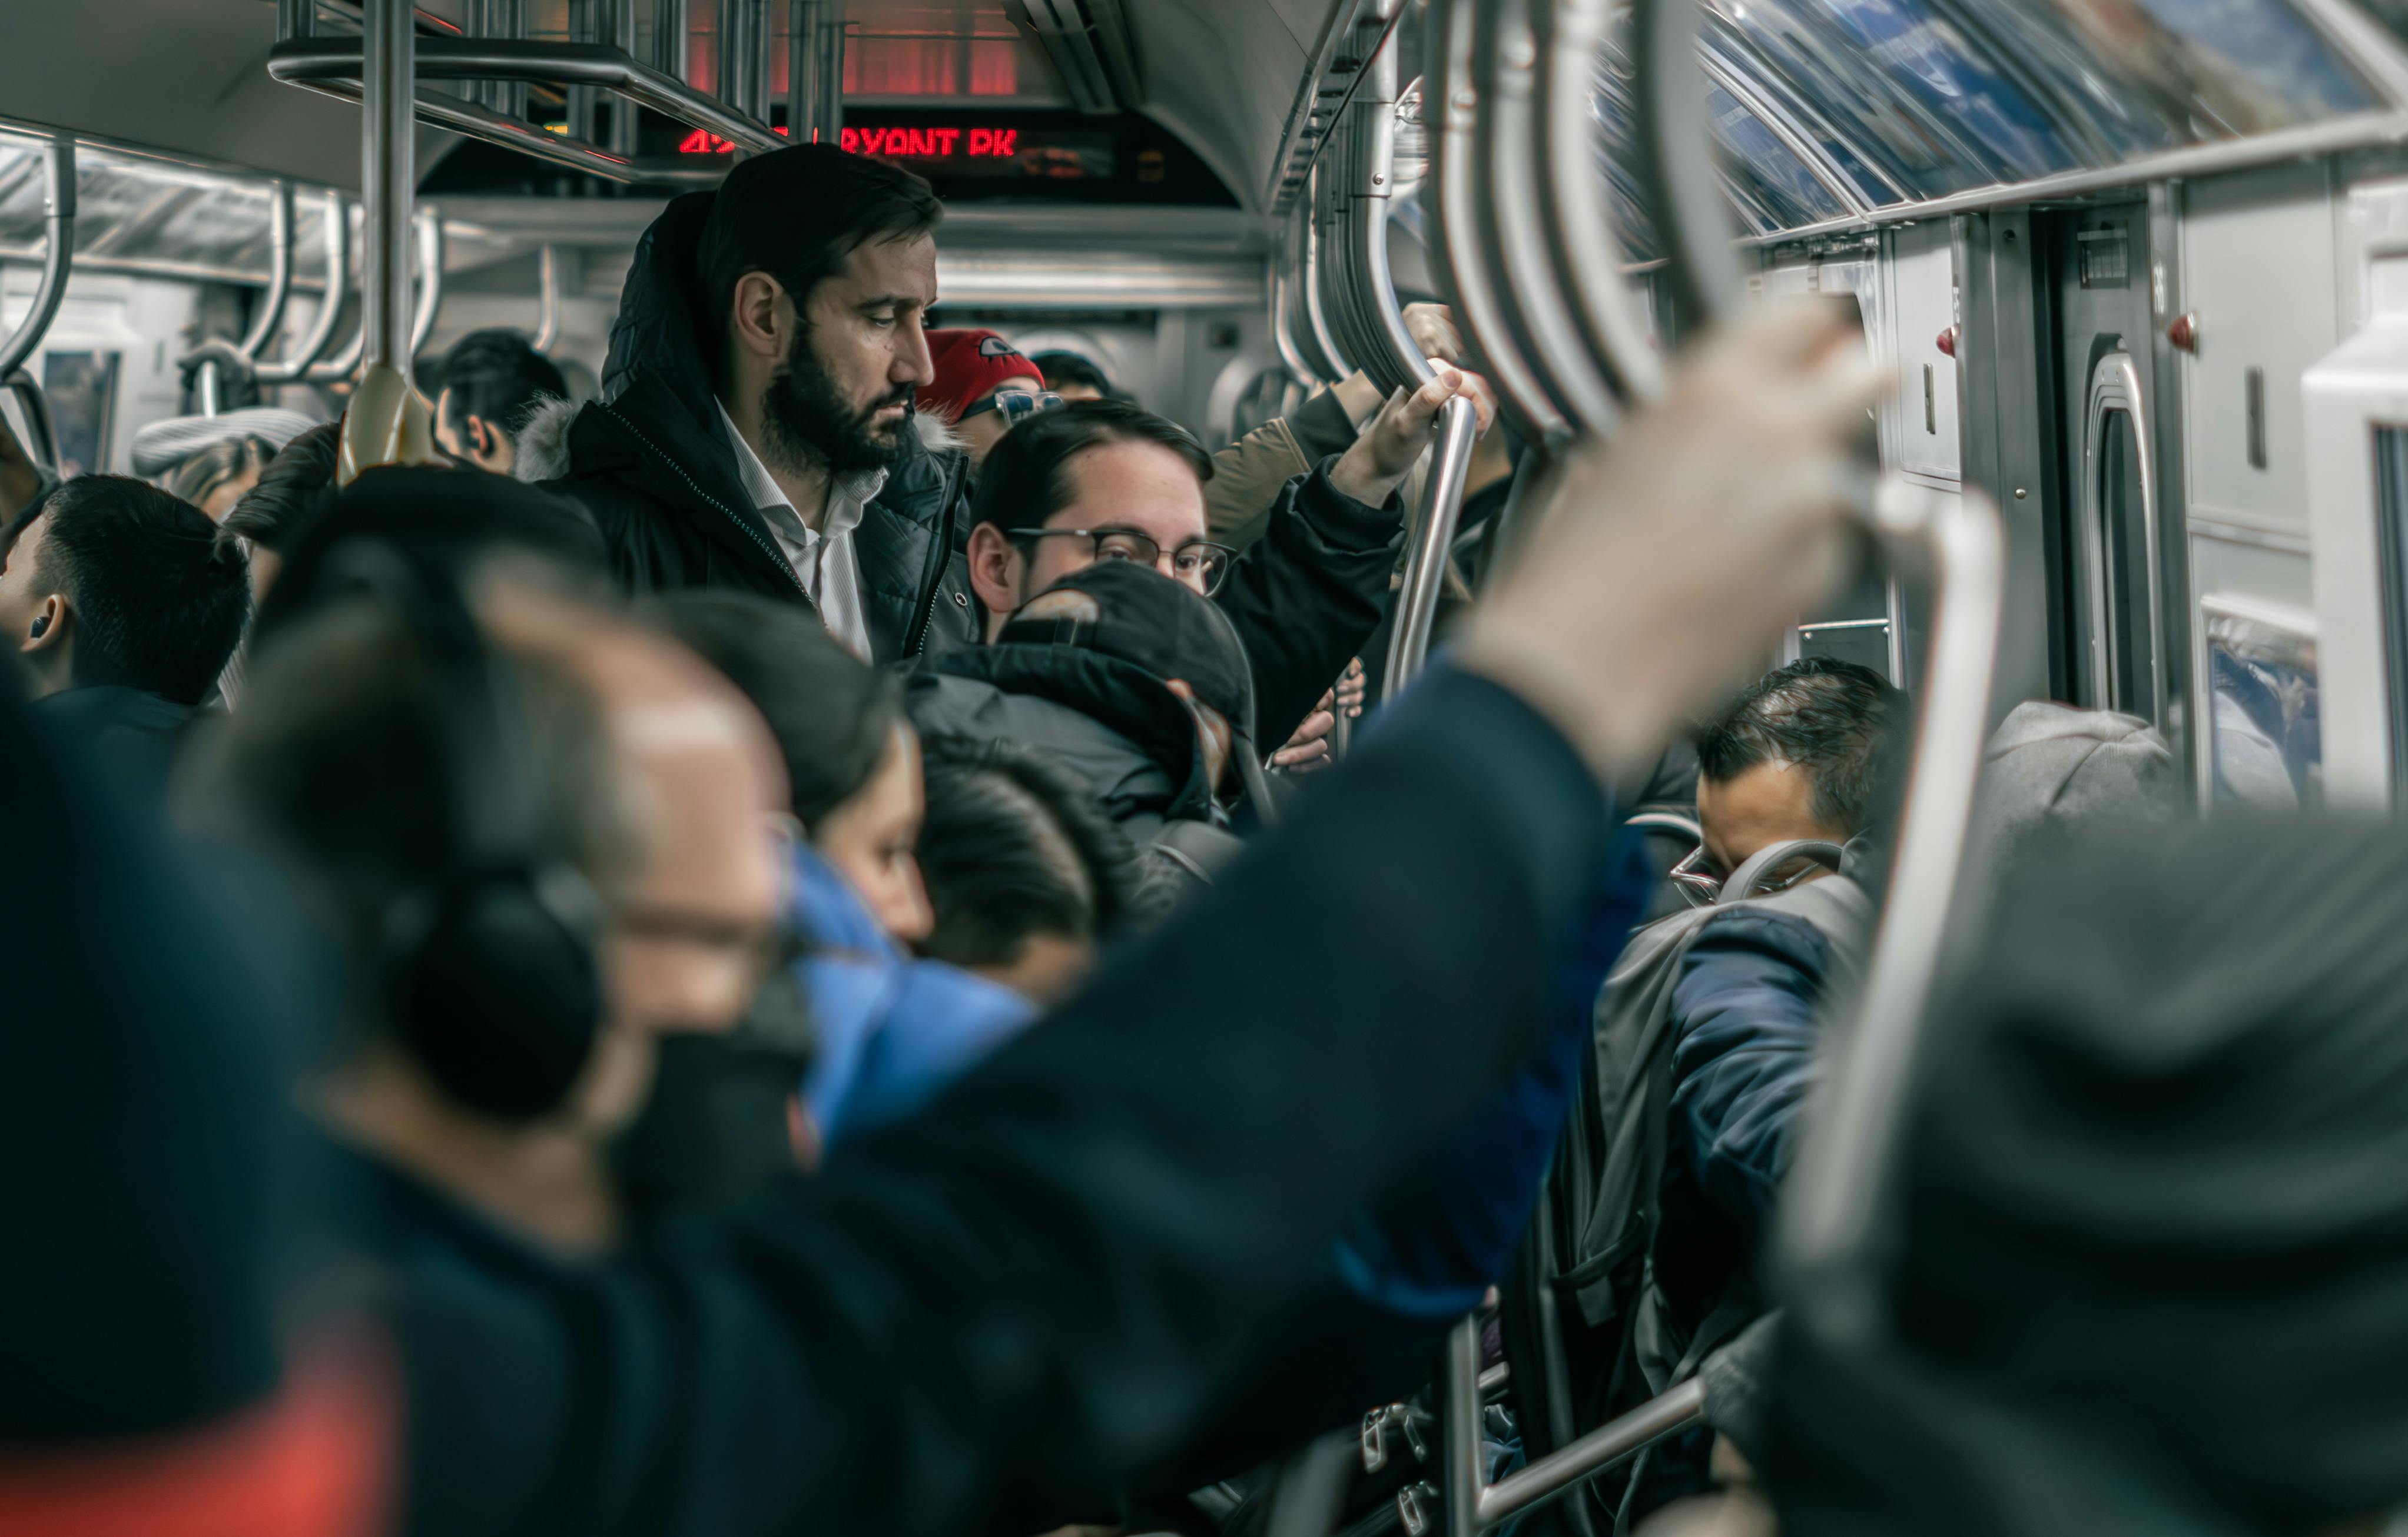 Man in a crowded bus | Source: Pexels